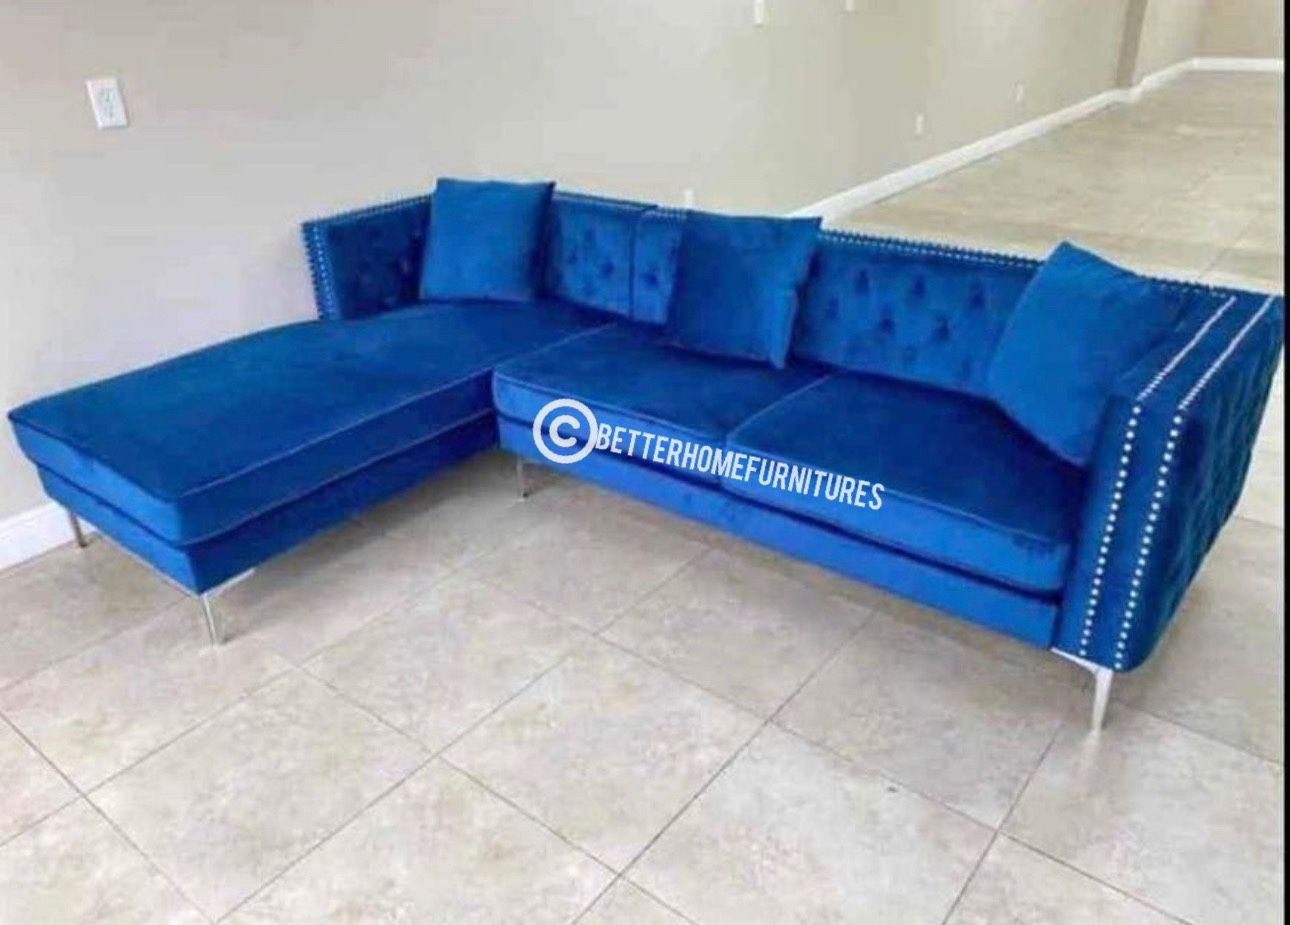 New Sectionals-Sofas. $0 interest Finance Available- SHOP NOW PAY LATER.   